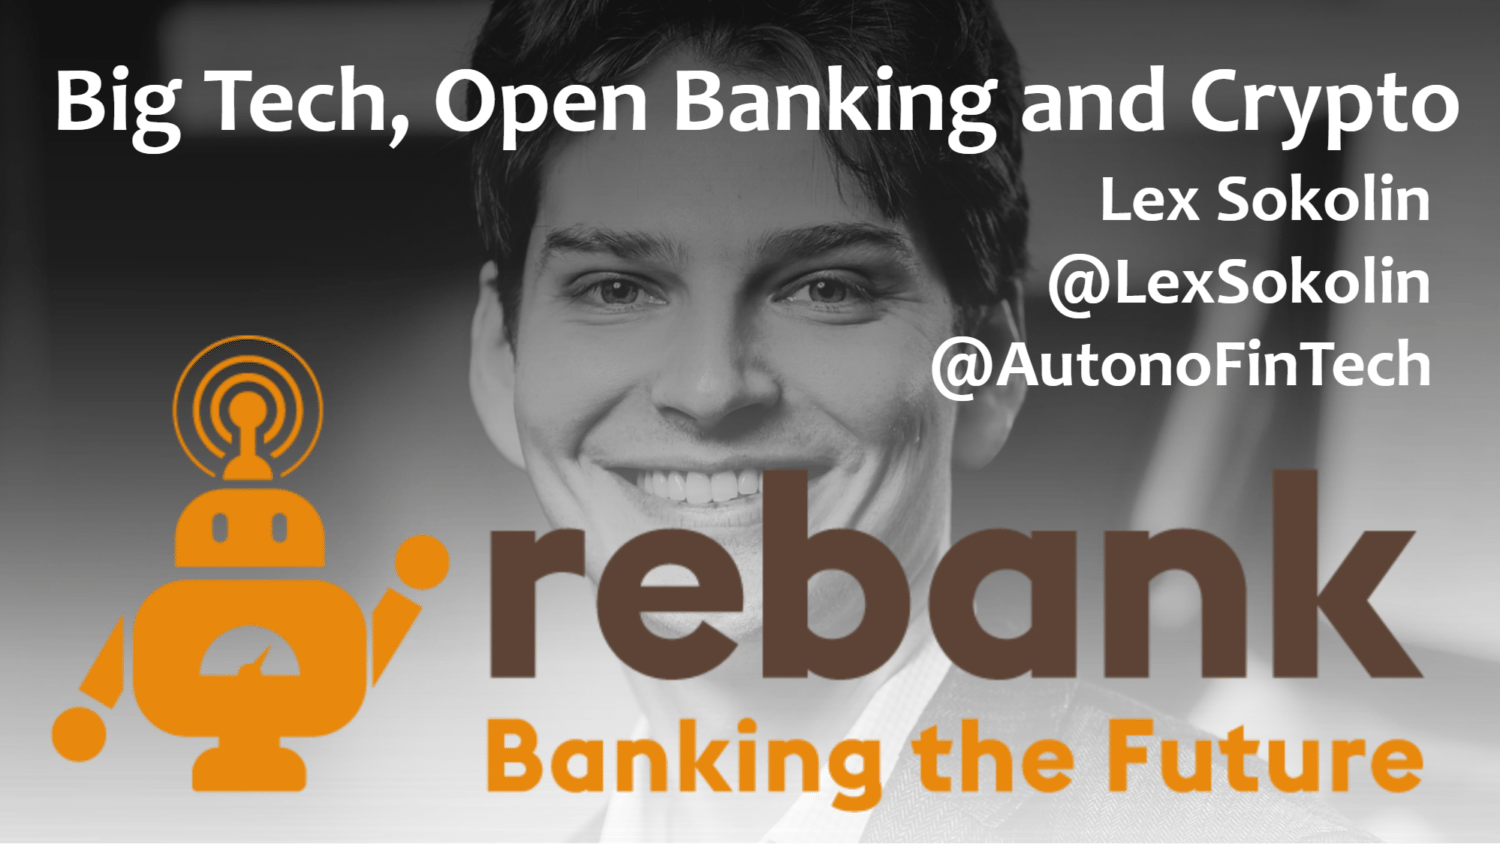 Big Tech, Open Banking and Crypto with Lex Sokolin